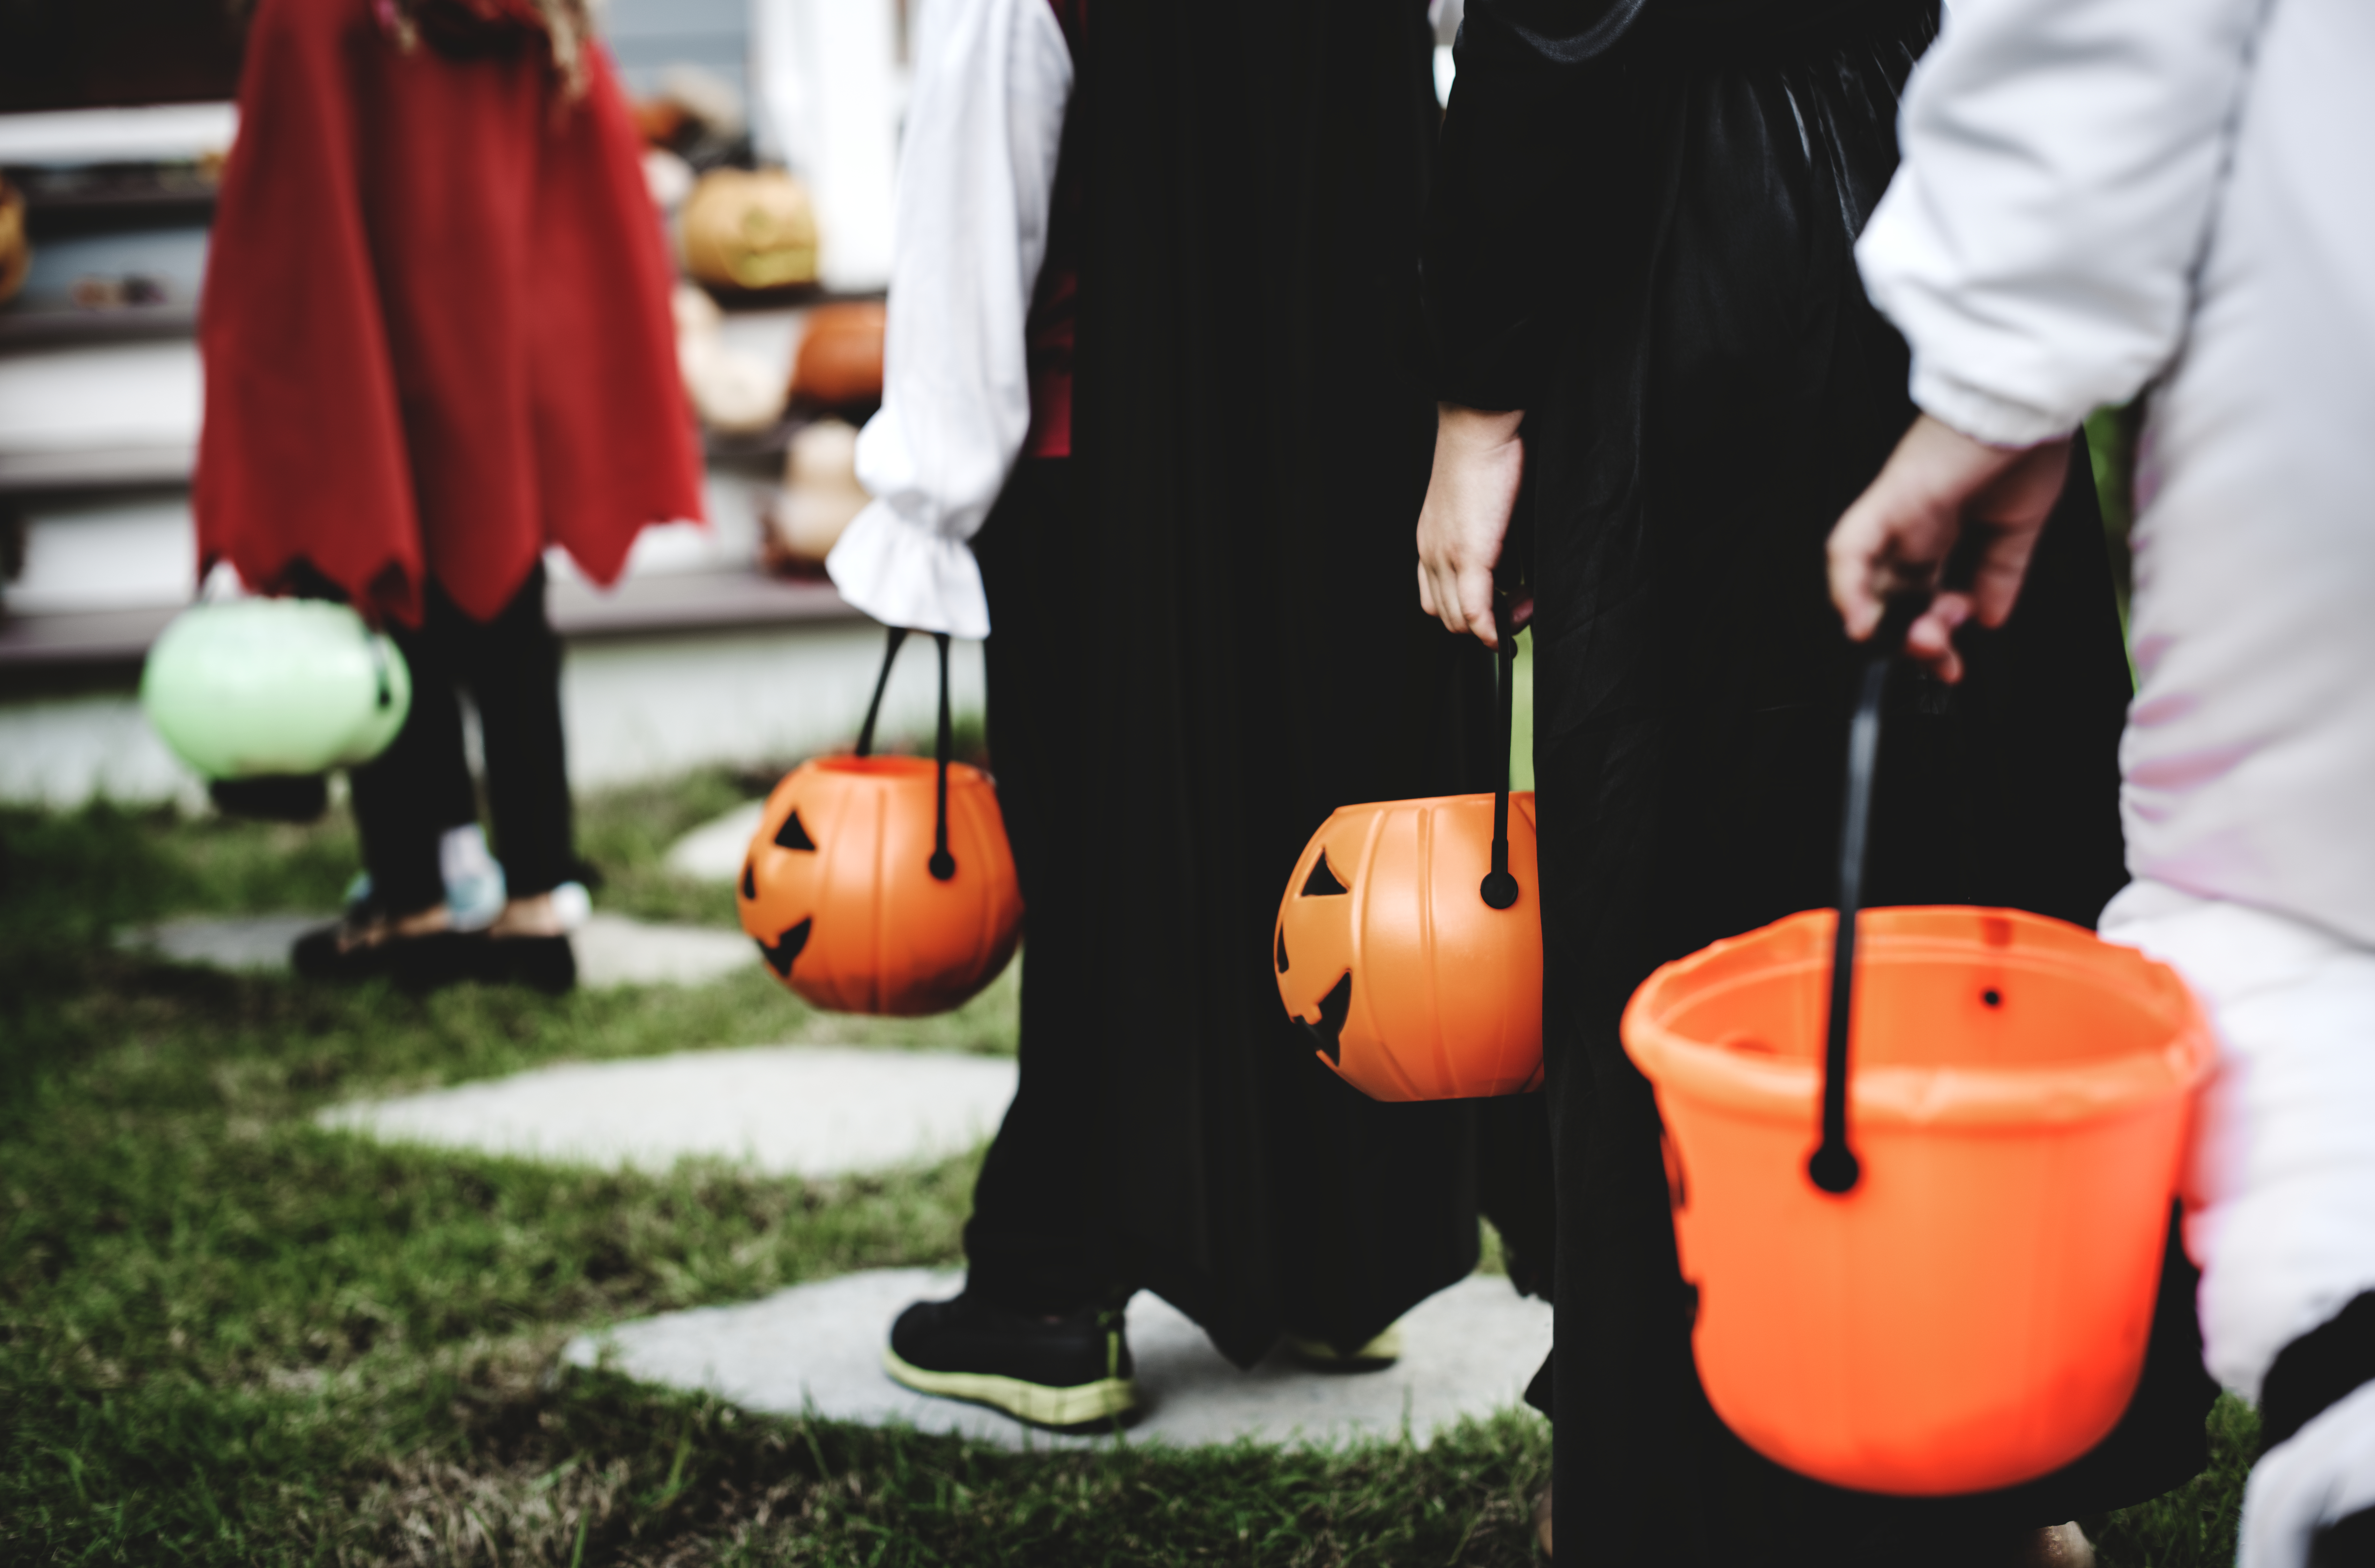 Tips for a Happy & Safe Halloween